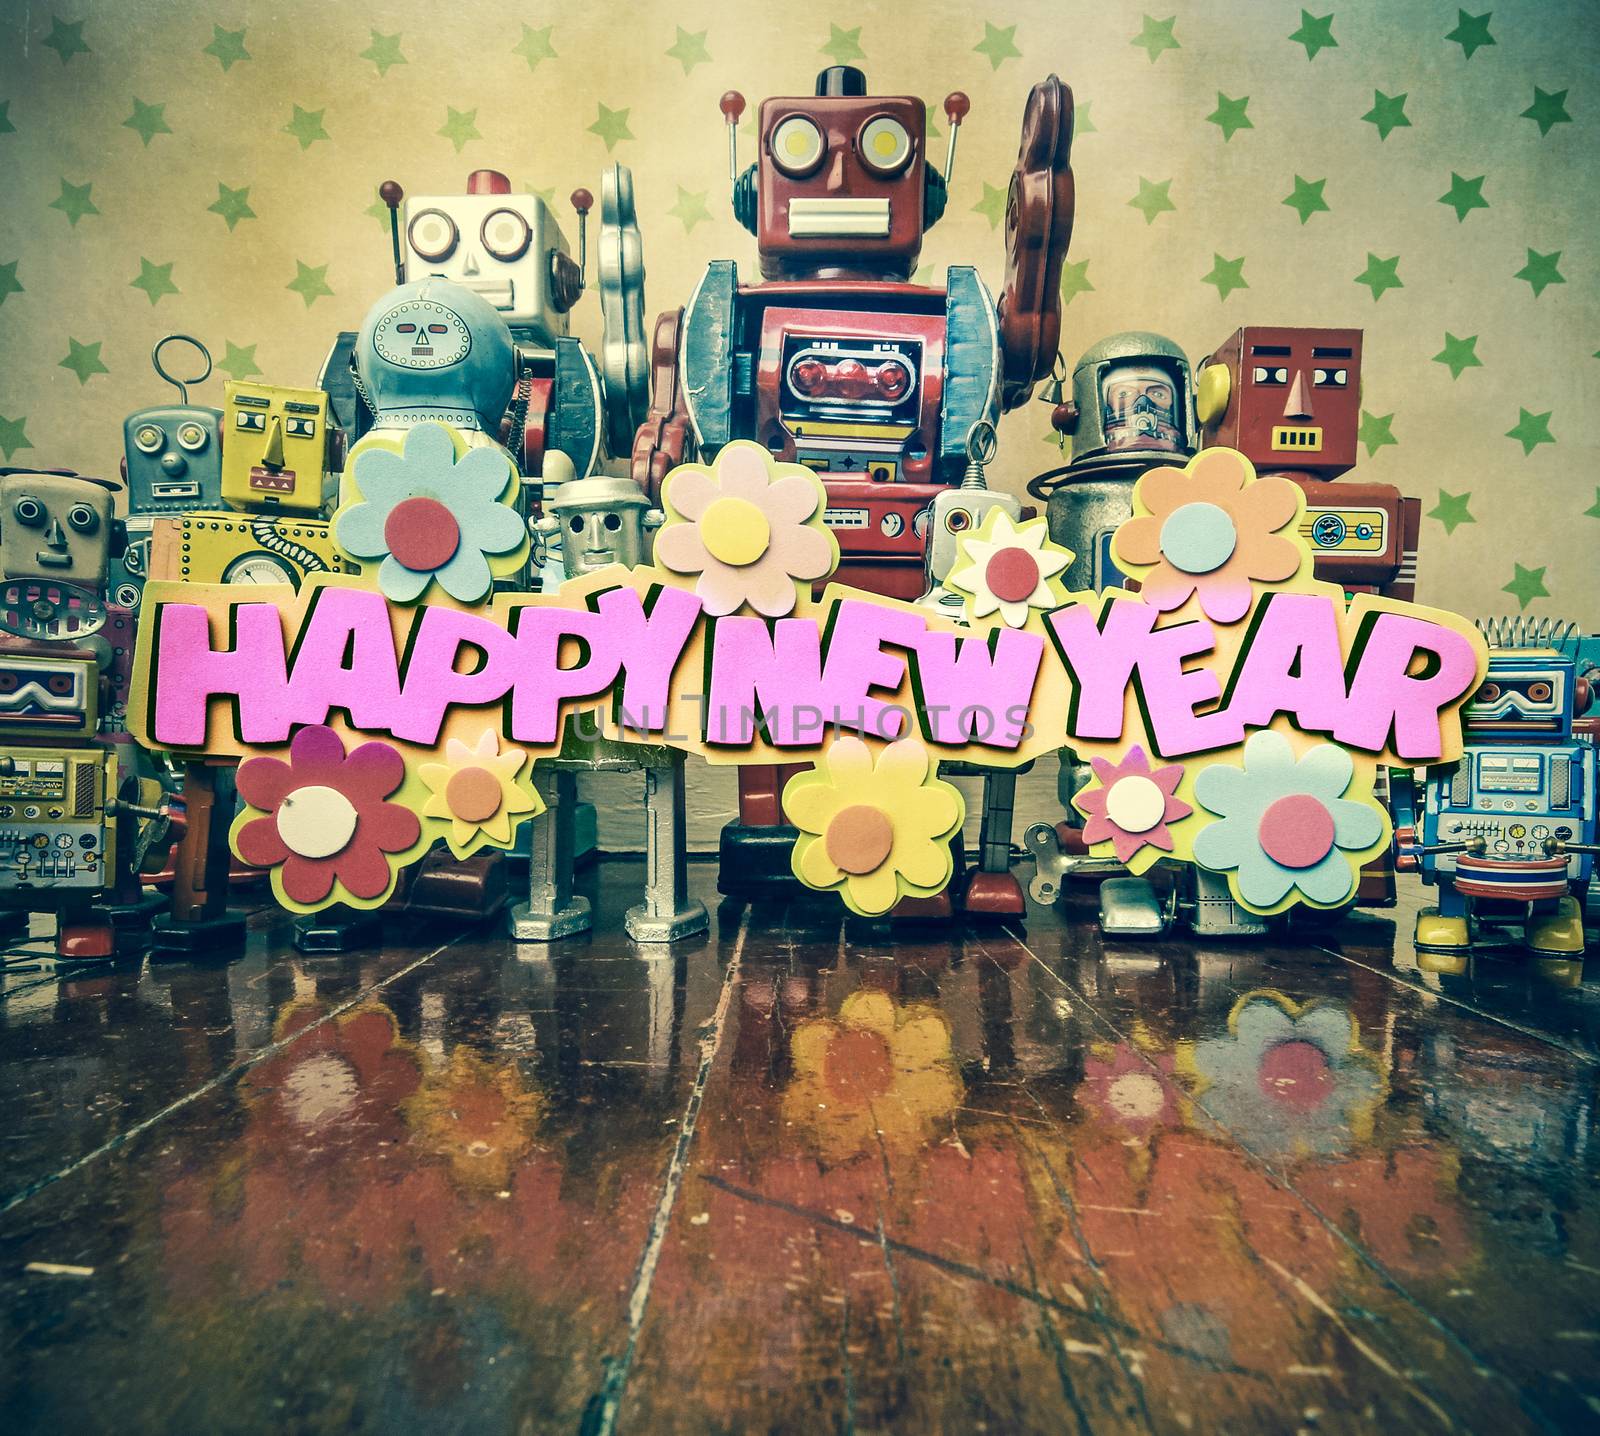 happy new year  text with vintage robots on old wooden floor